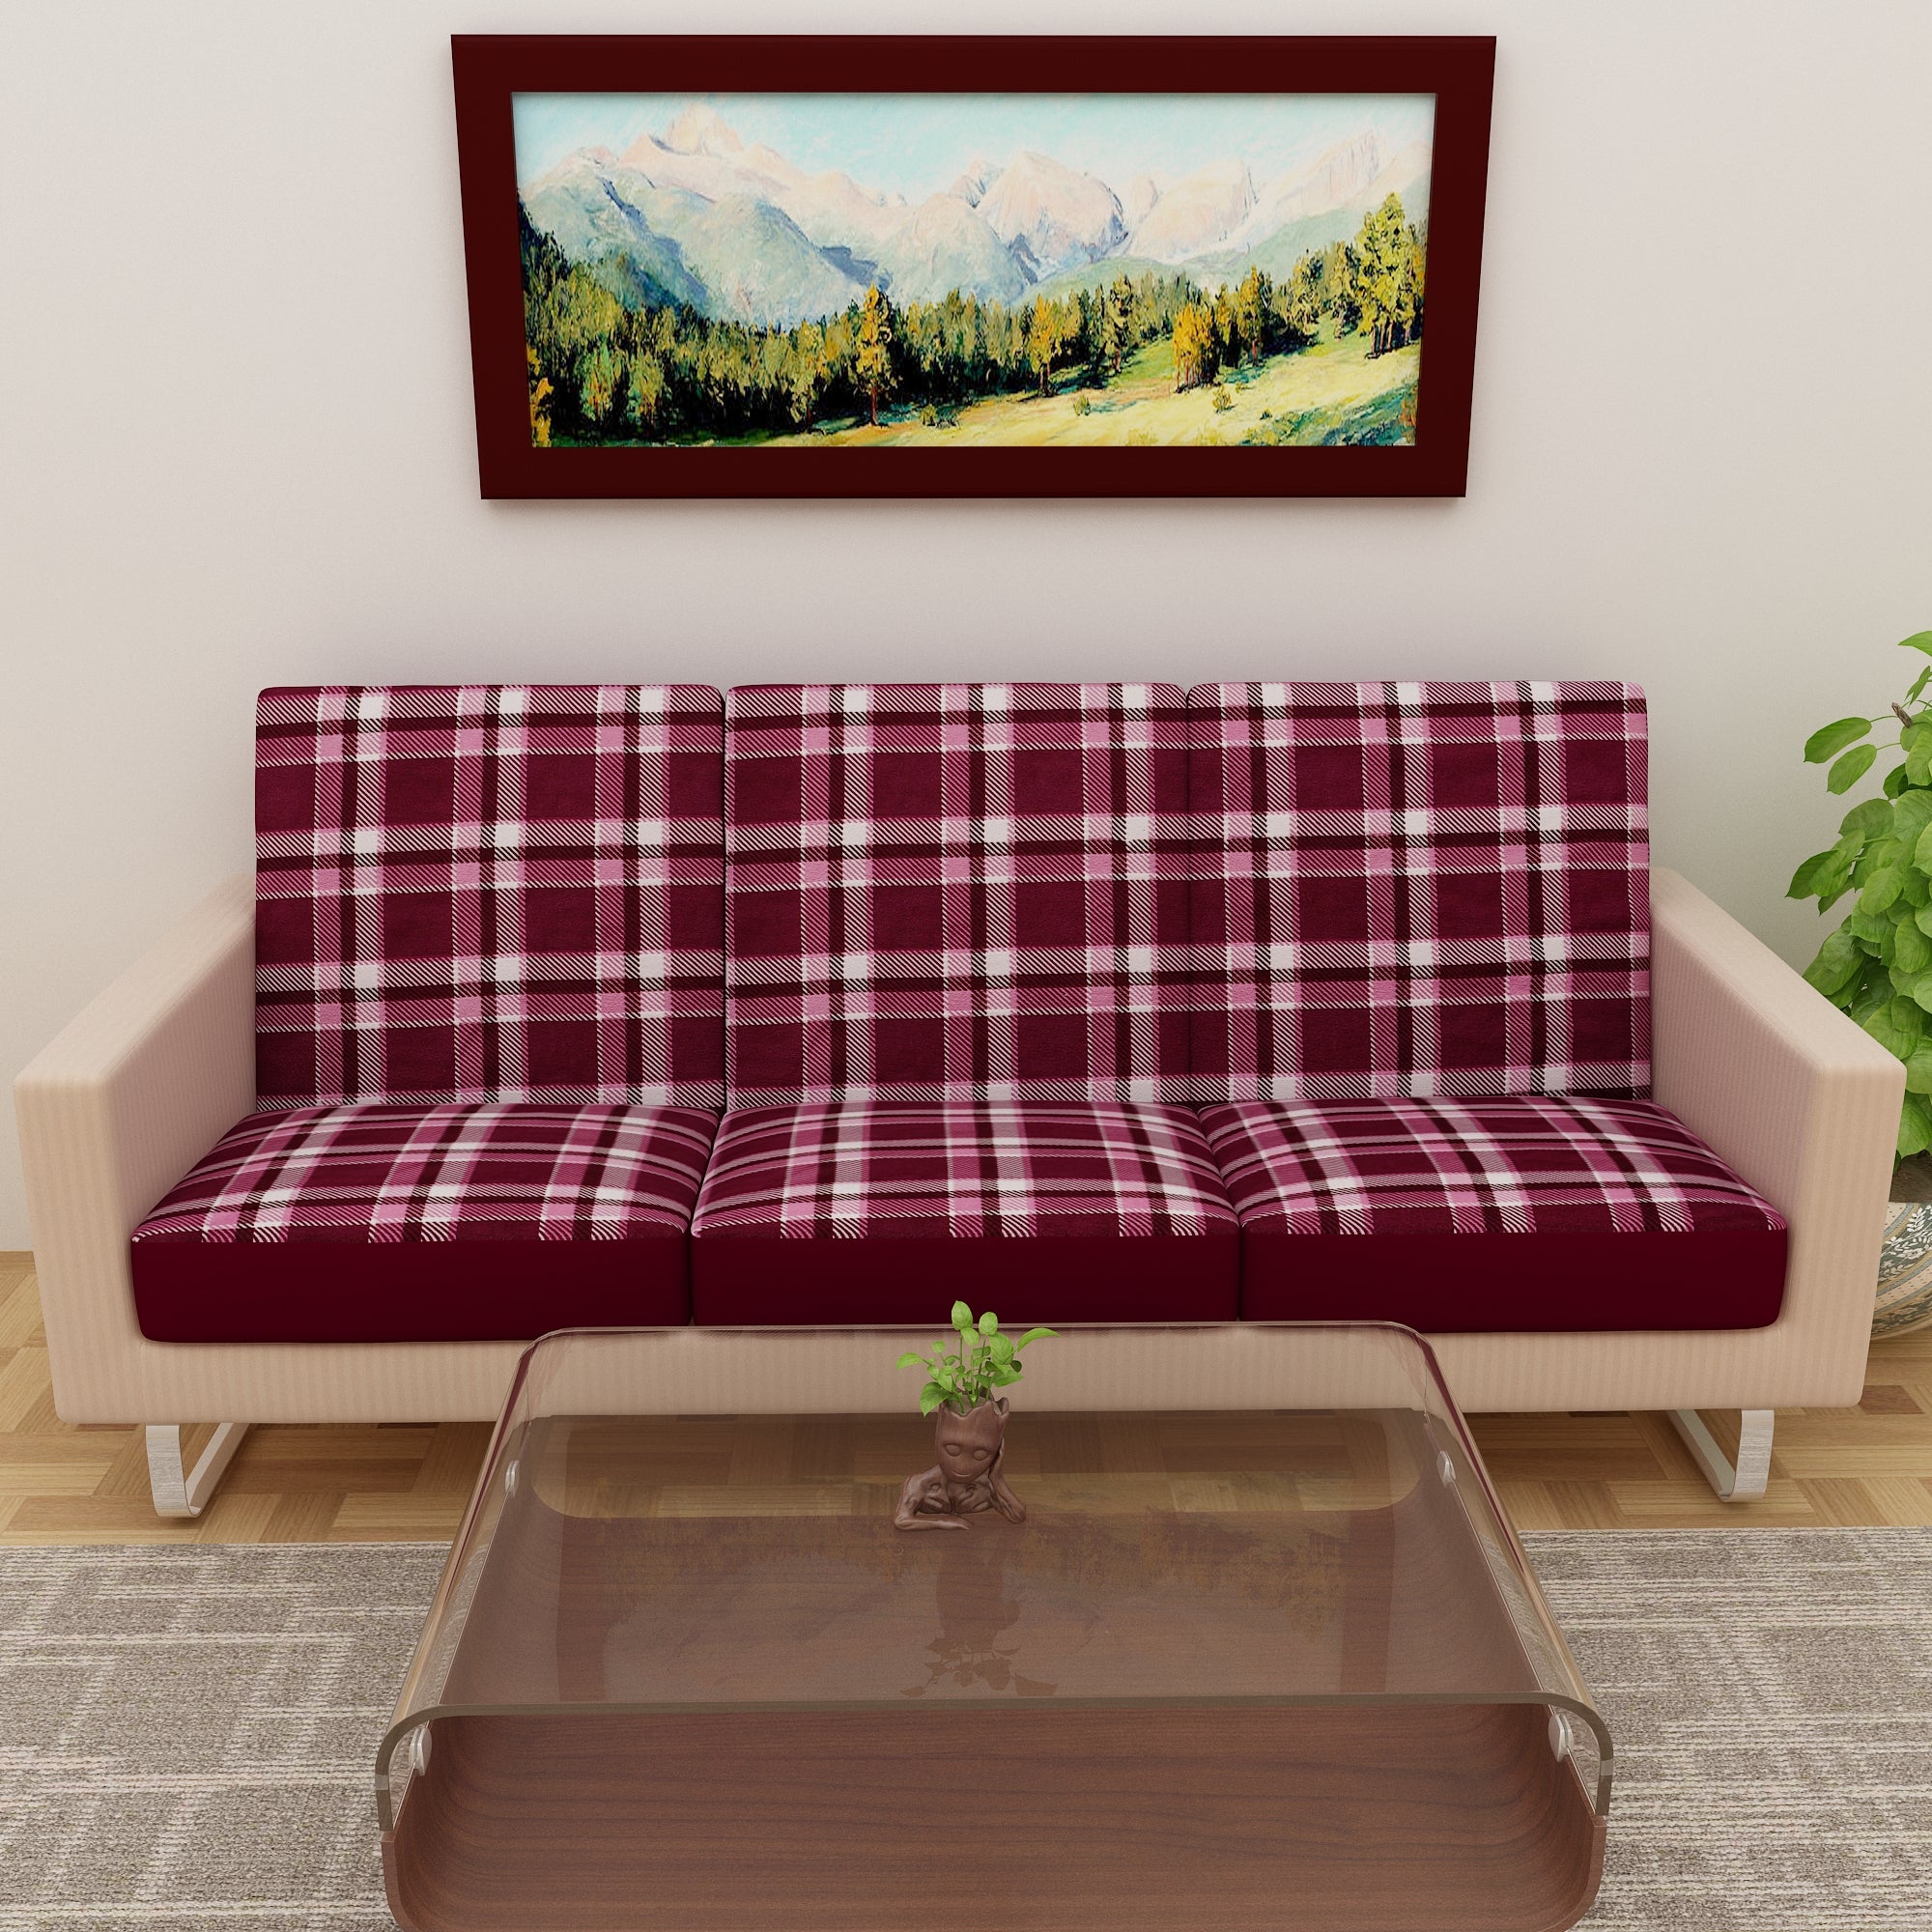 Waterproof Printed Sofa Seat Protector Cover with Stretchable Elastic, Maroon - Dream Care Furnishings Private Limited